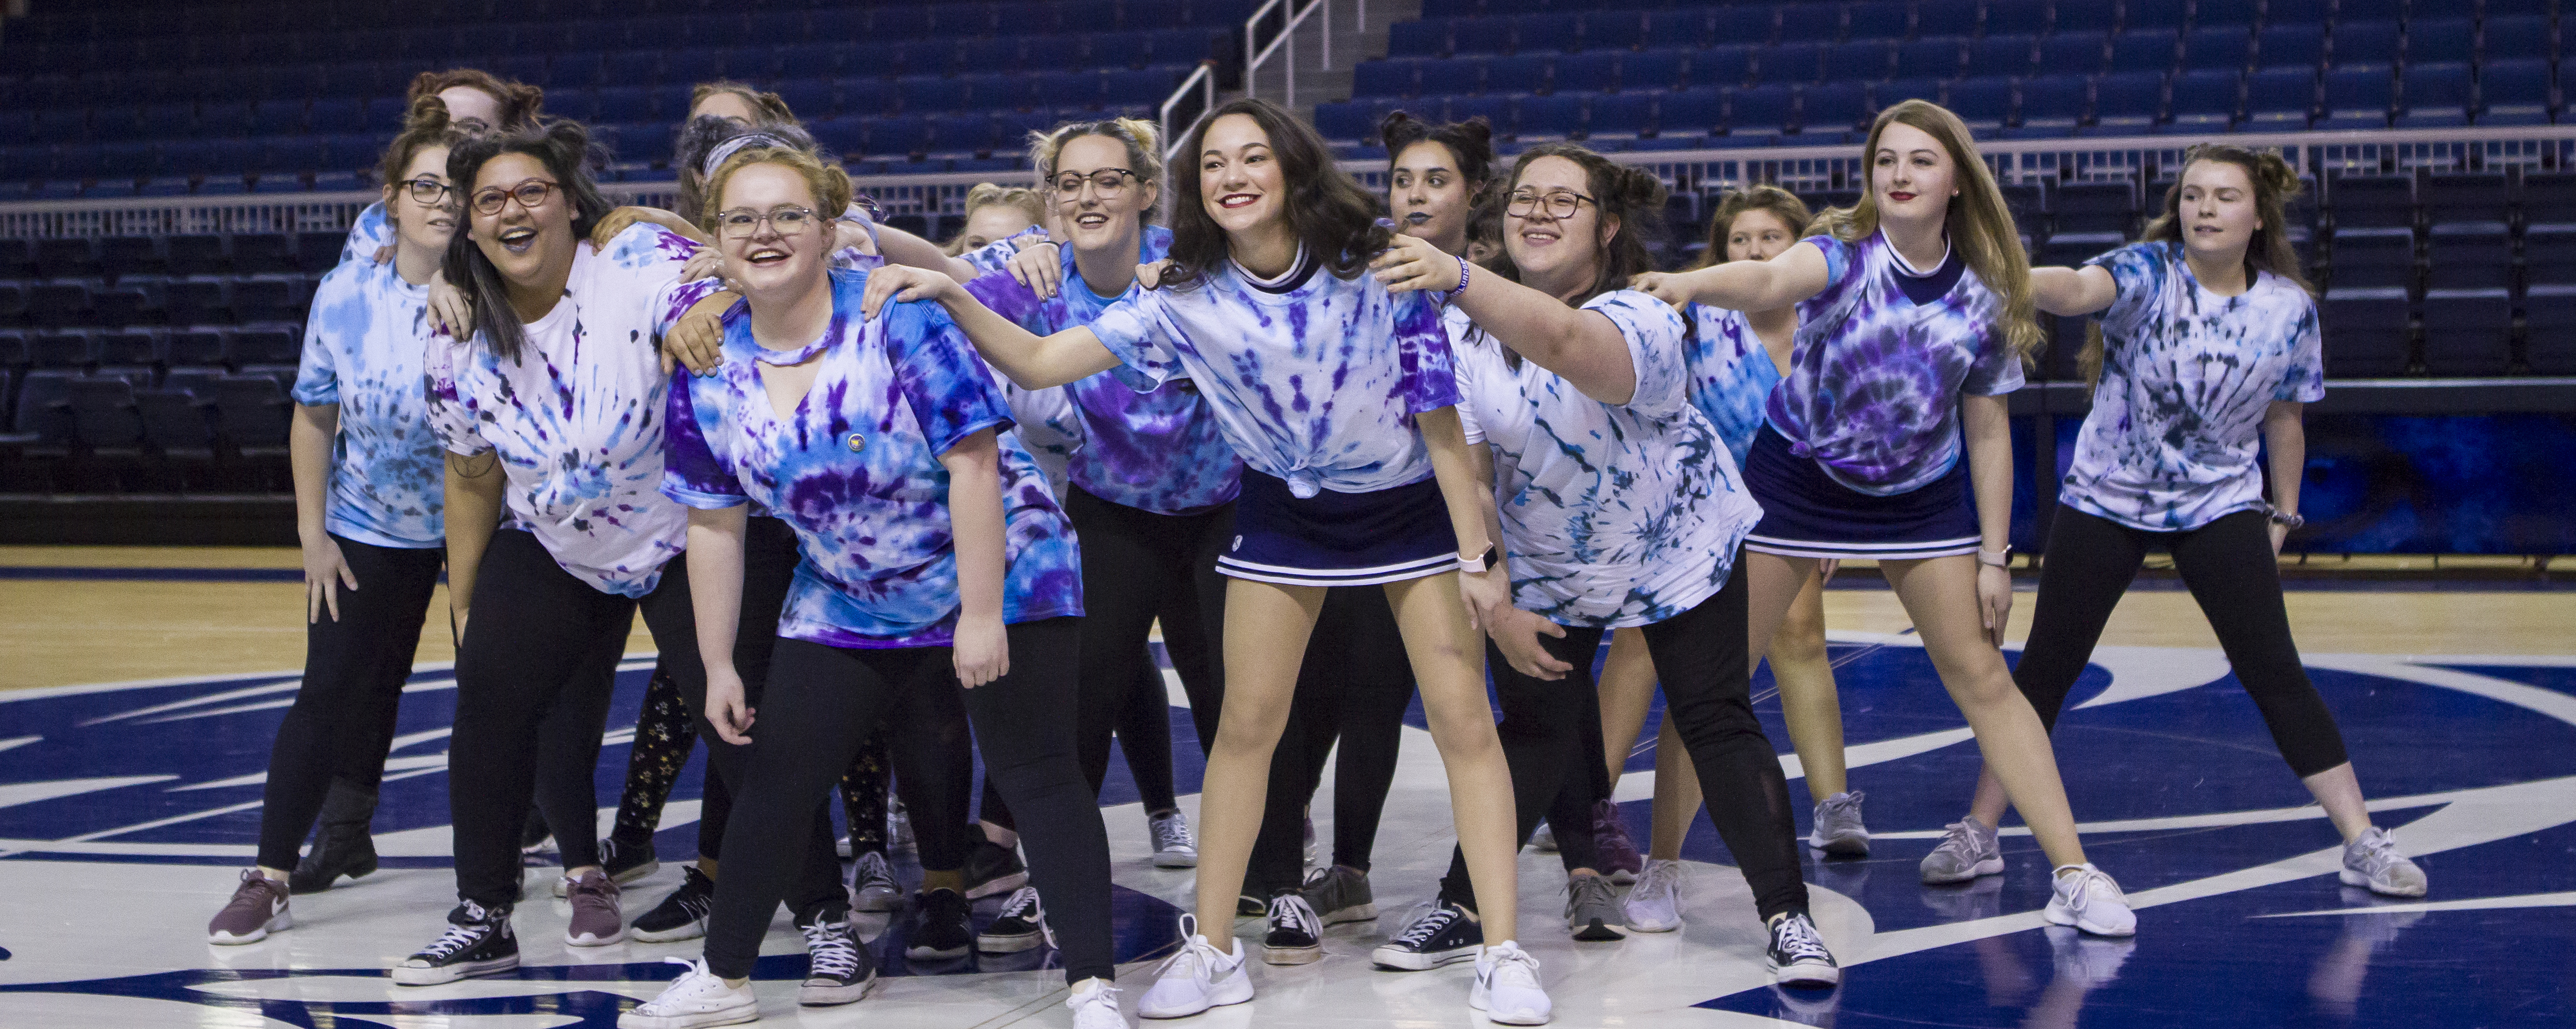 UAFS Announces Homecoming Events Feb 24-29